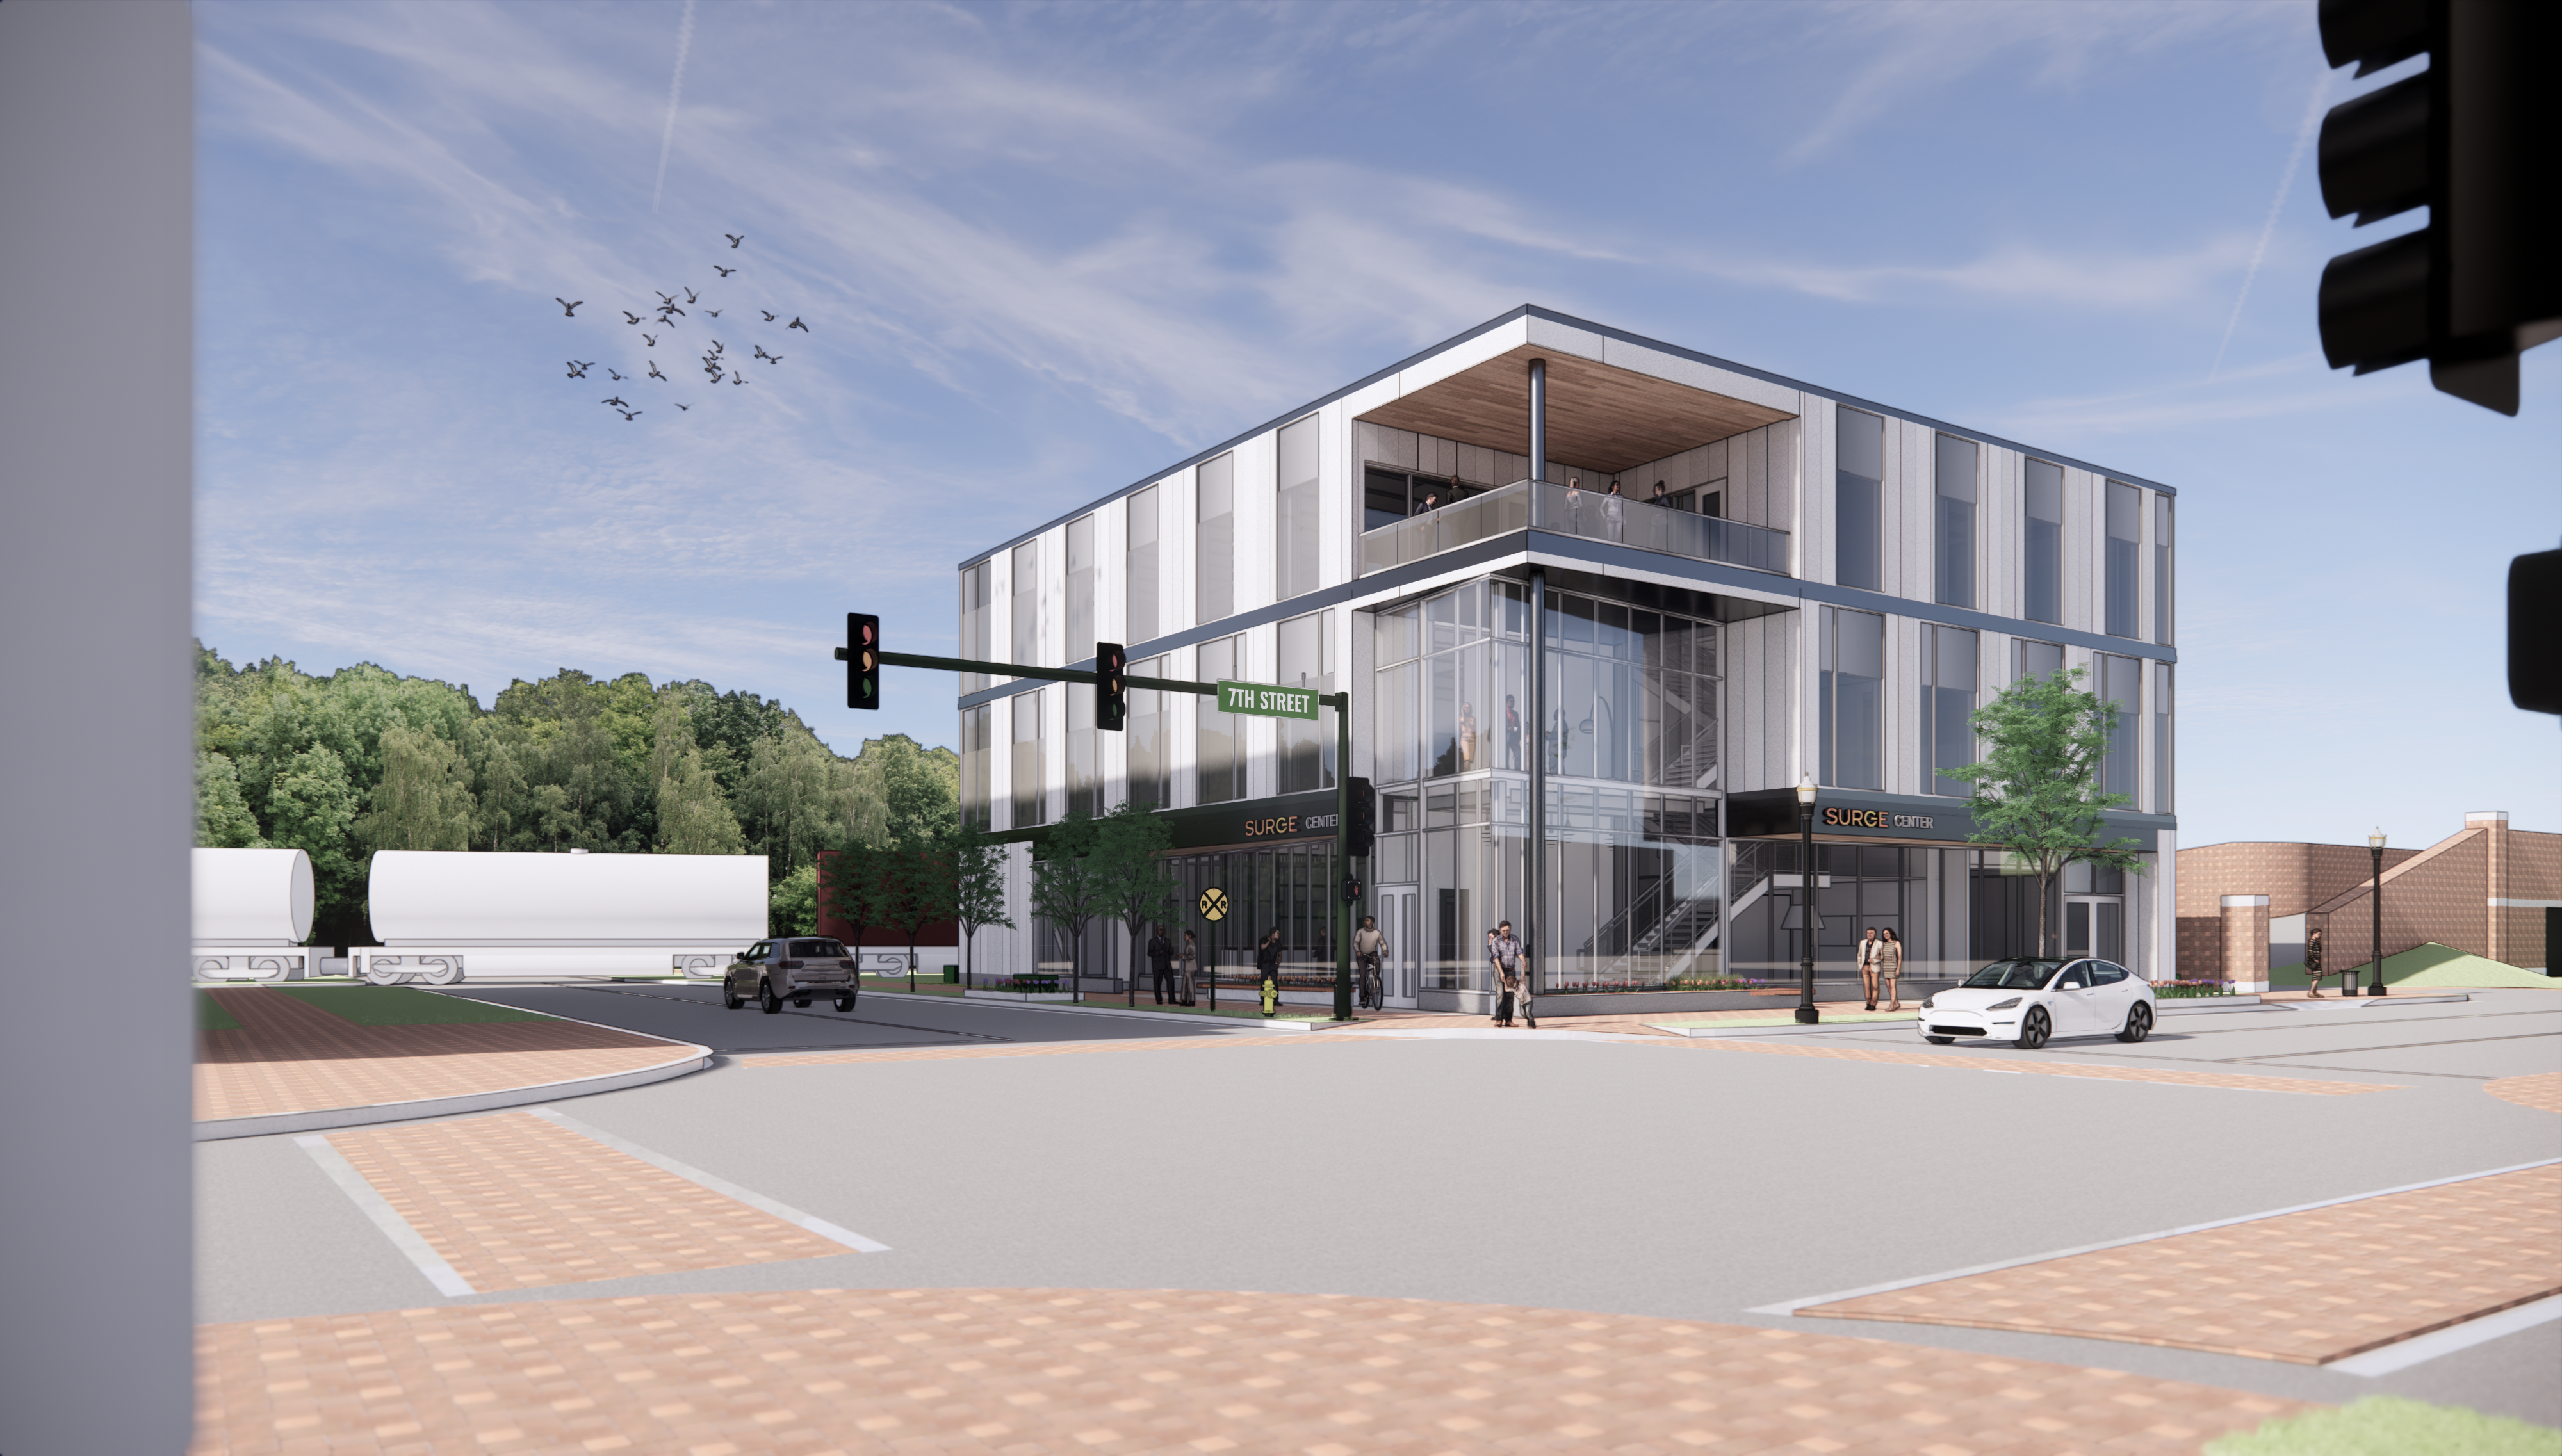 New West Michigan Technology and Innovation Hub “The Next Center Announced